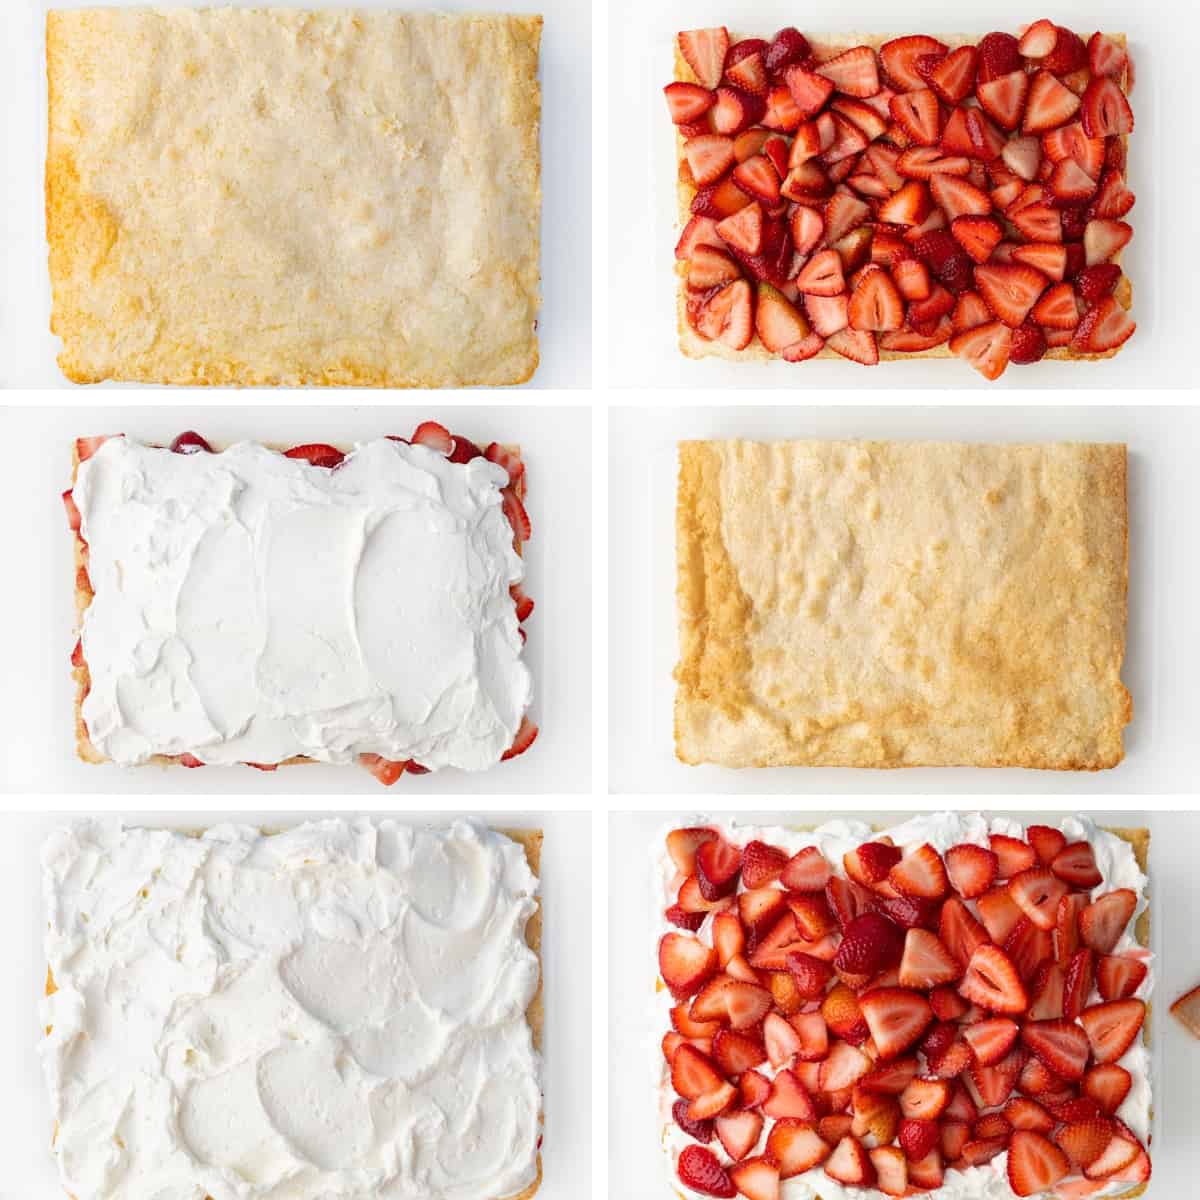 Steps for Adding Layers to Make a Sheet Pan Strawberry Shortcake with Strawberries and Whipped Topping.